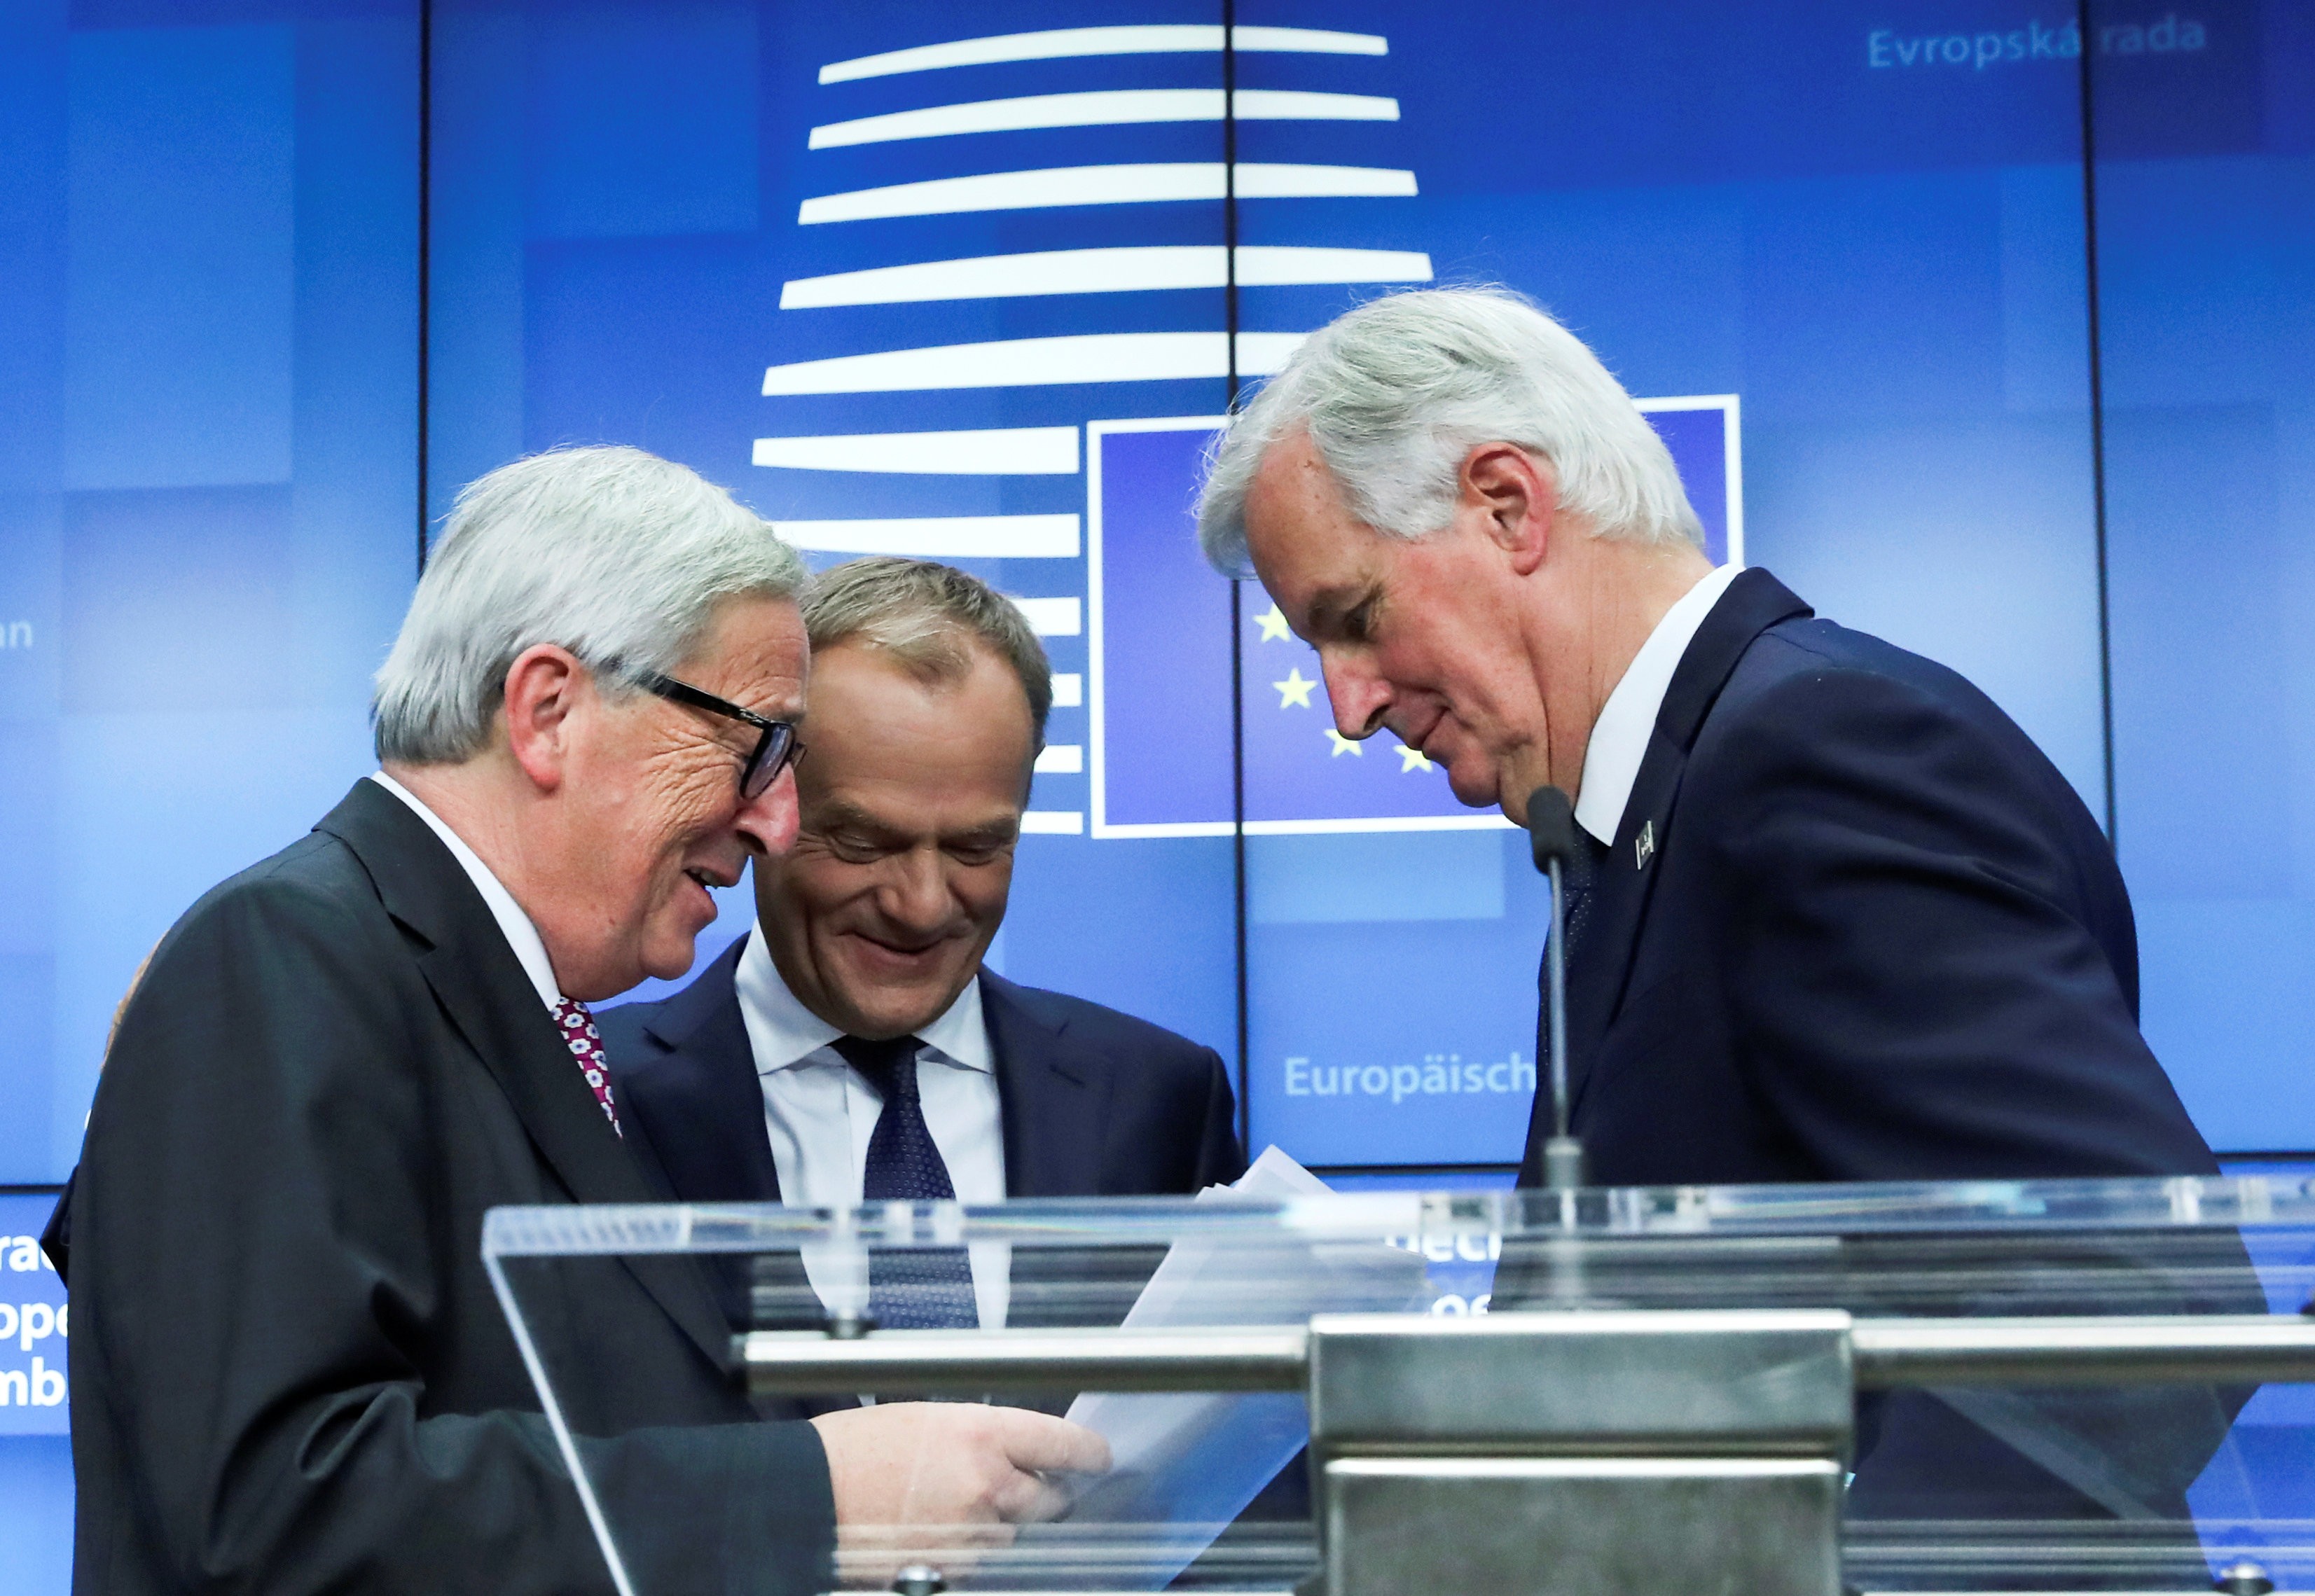 From left: European Commission President Jean-Claude Juncker, European Council President Donald Tusk and the European Union’s chief Brexit negotiator Michel Barnier chat during a news conference after an extraordinary EU leaders summit to formalise the Brexit agreement in Brussels, Belgium on November 25, 2018. Photo: Reuters